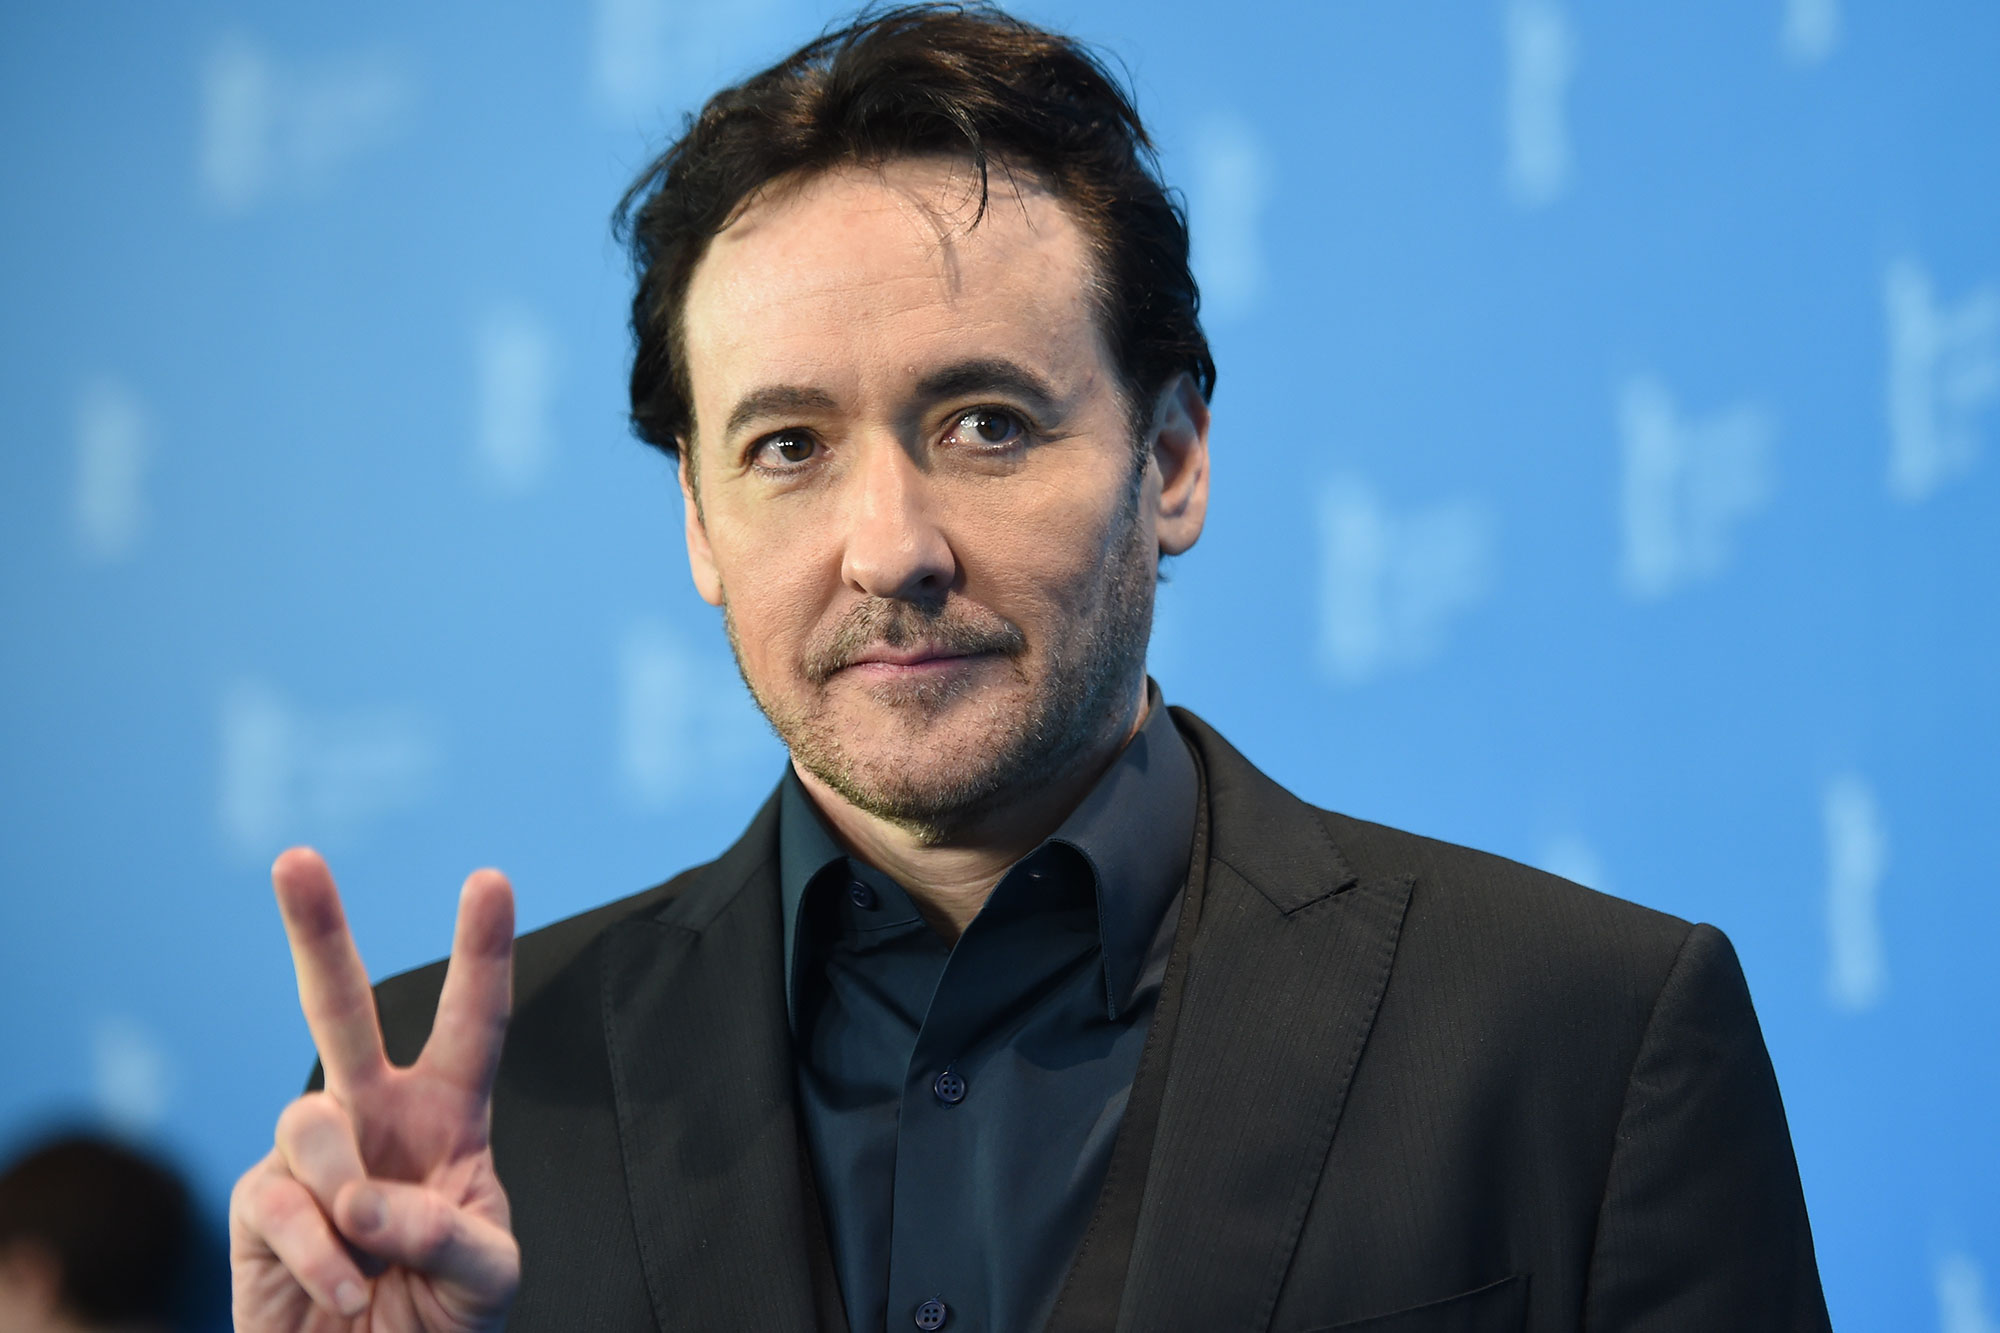 John Cusack Shares Video Of Altercation With Police During Black Lives Matter Protest